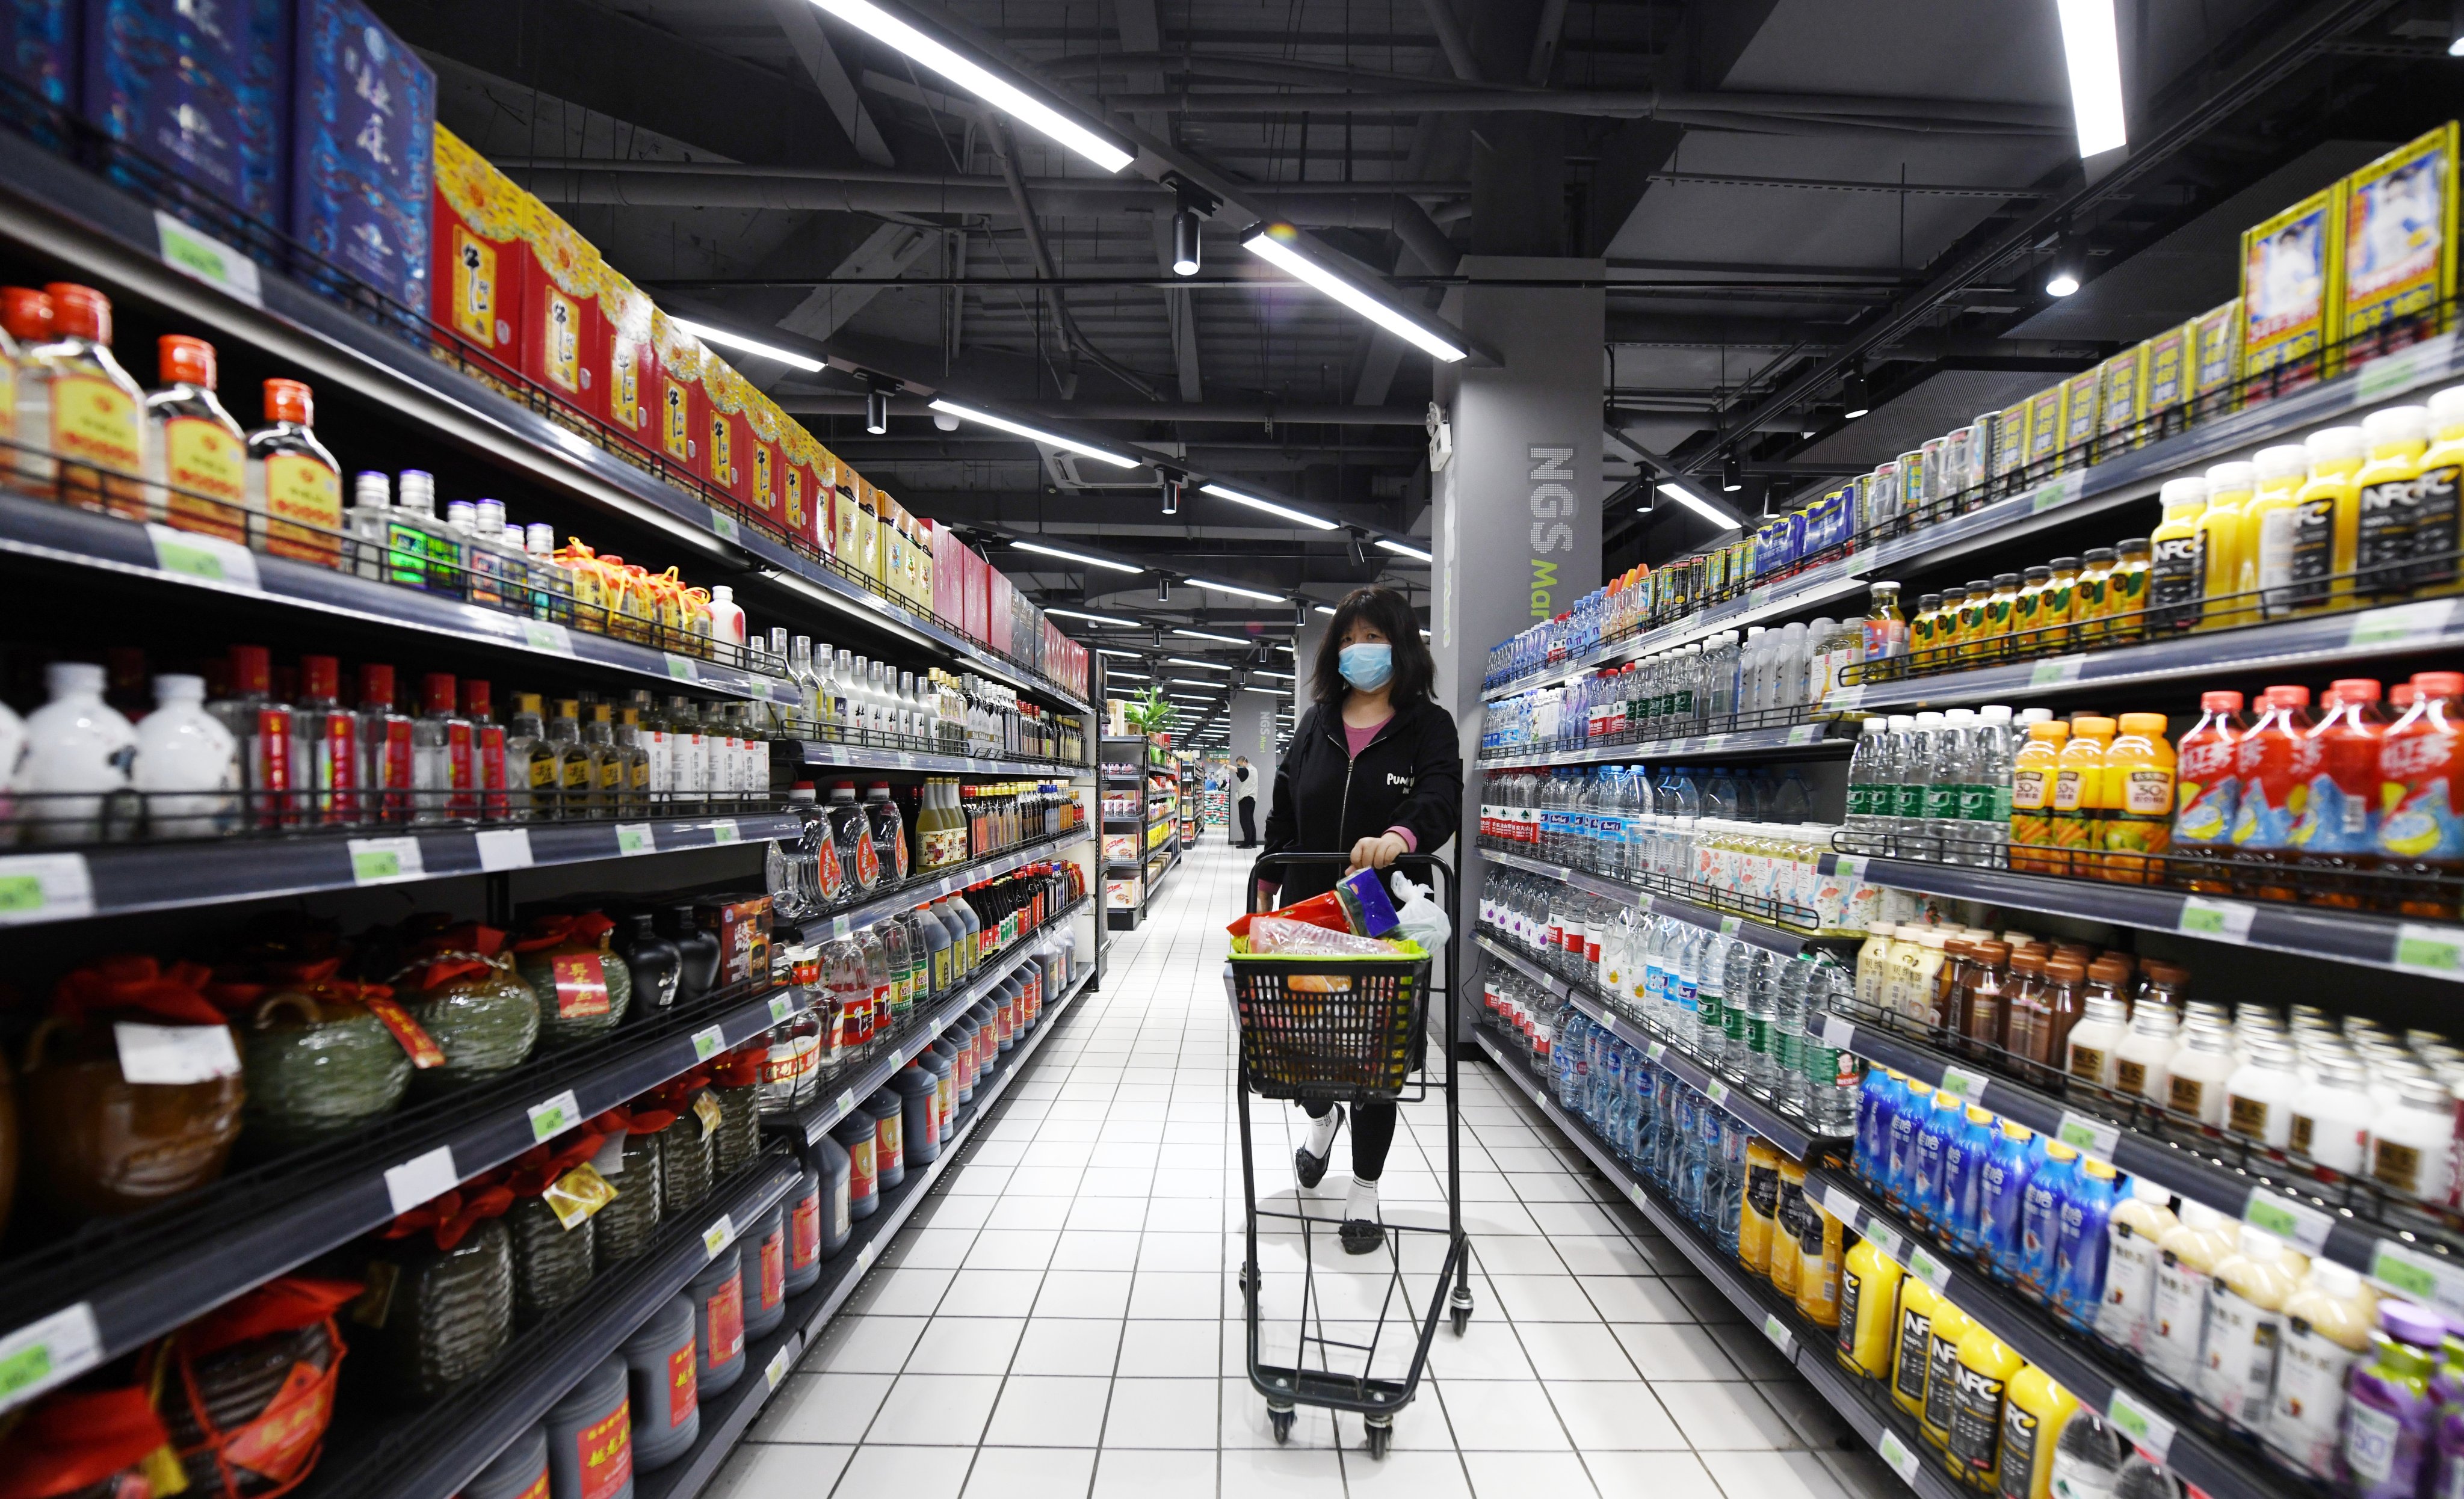 A customer at a supermarket that reopened in Shanghai on May 16, 2022 amid declining infections. Photo: VCG